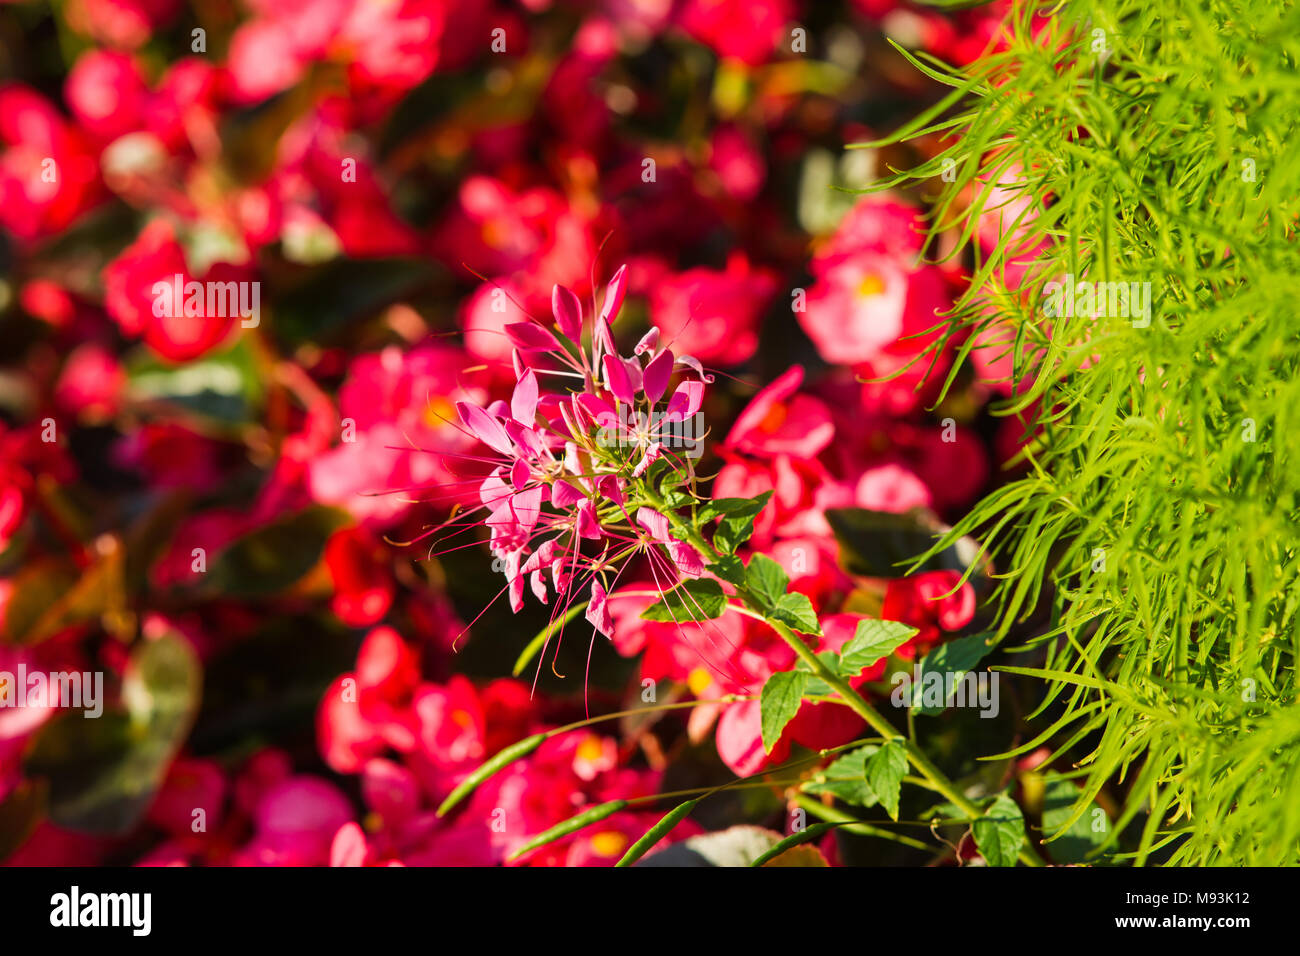 Sunlit pink flower, red begonia flowers and green grass in the background Stock Photo